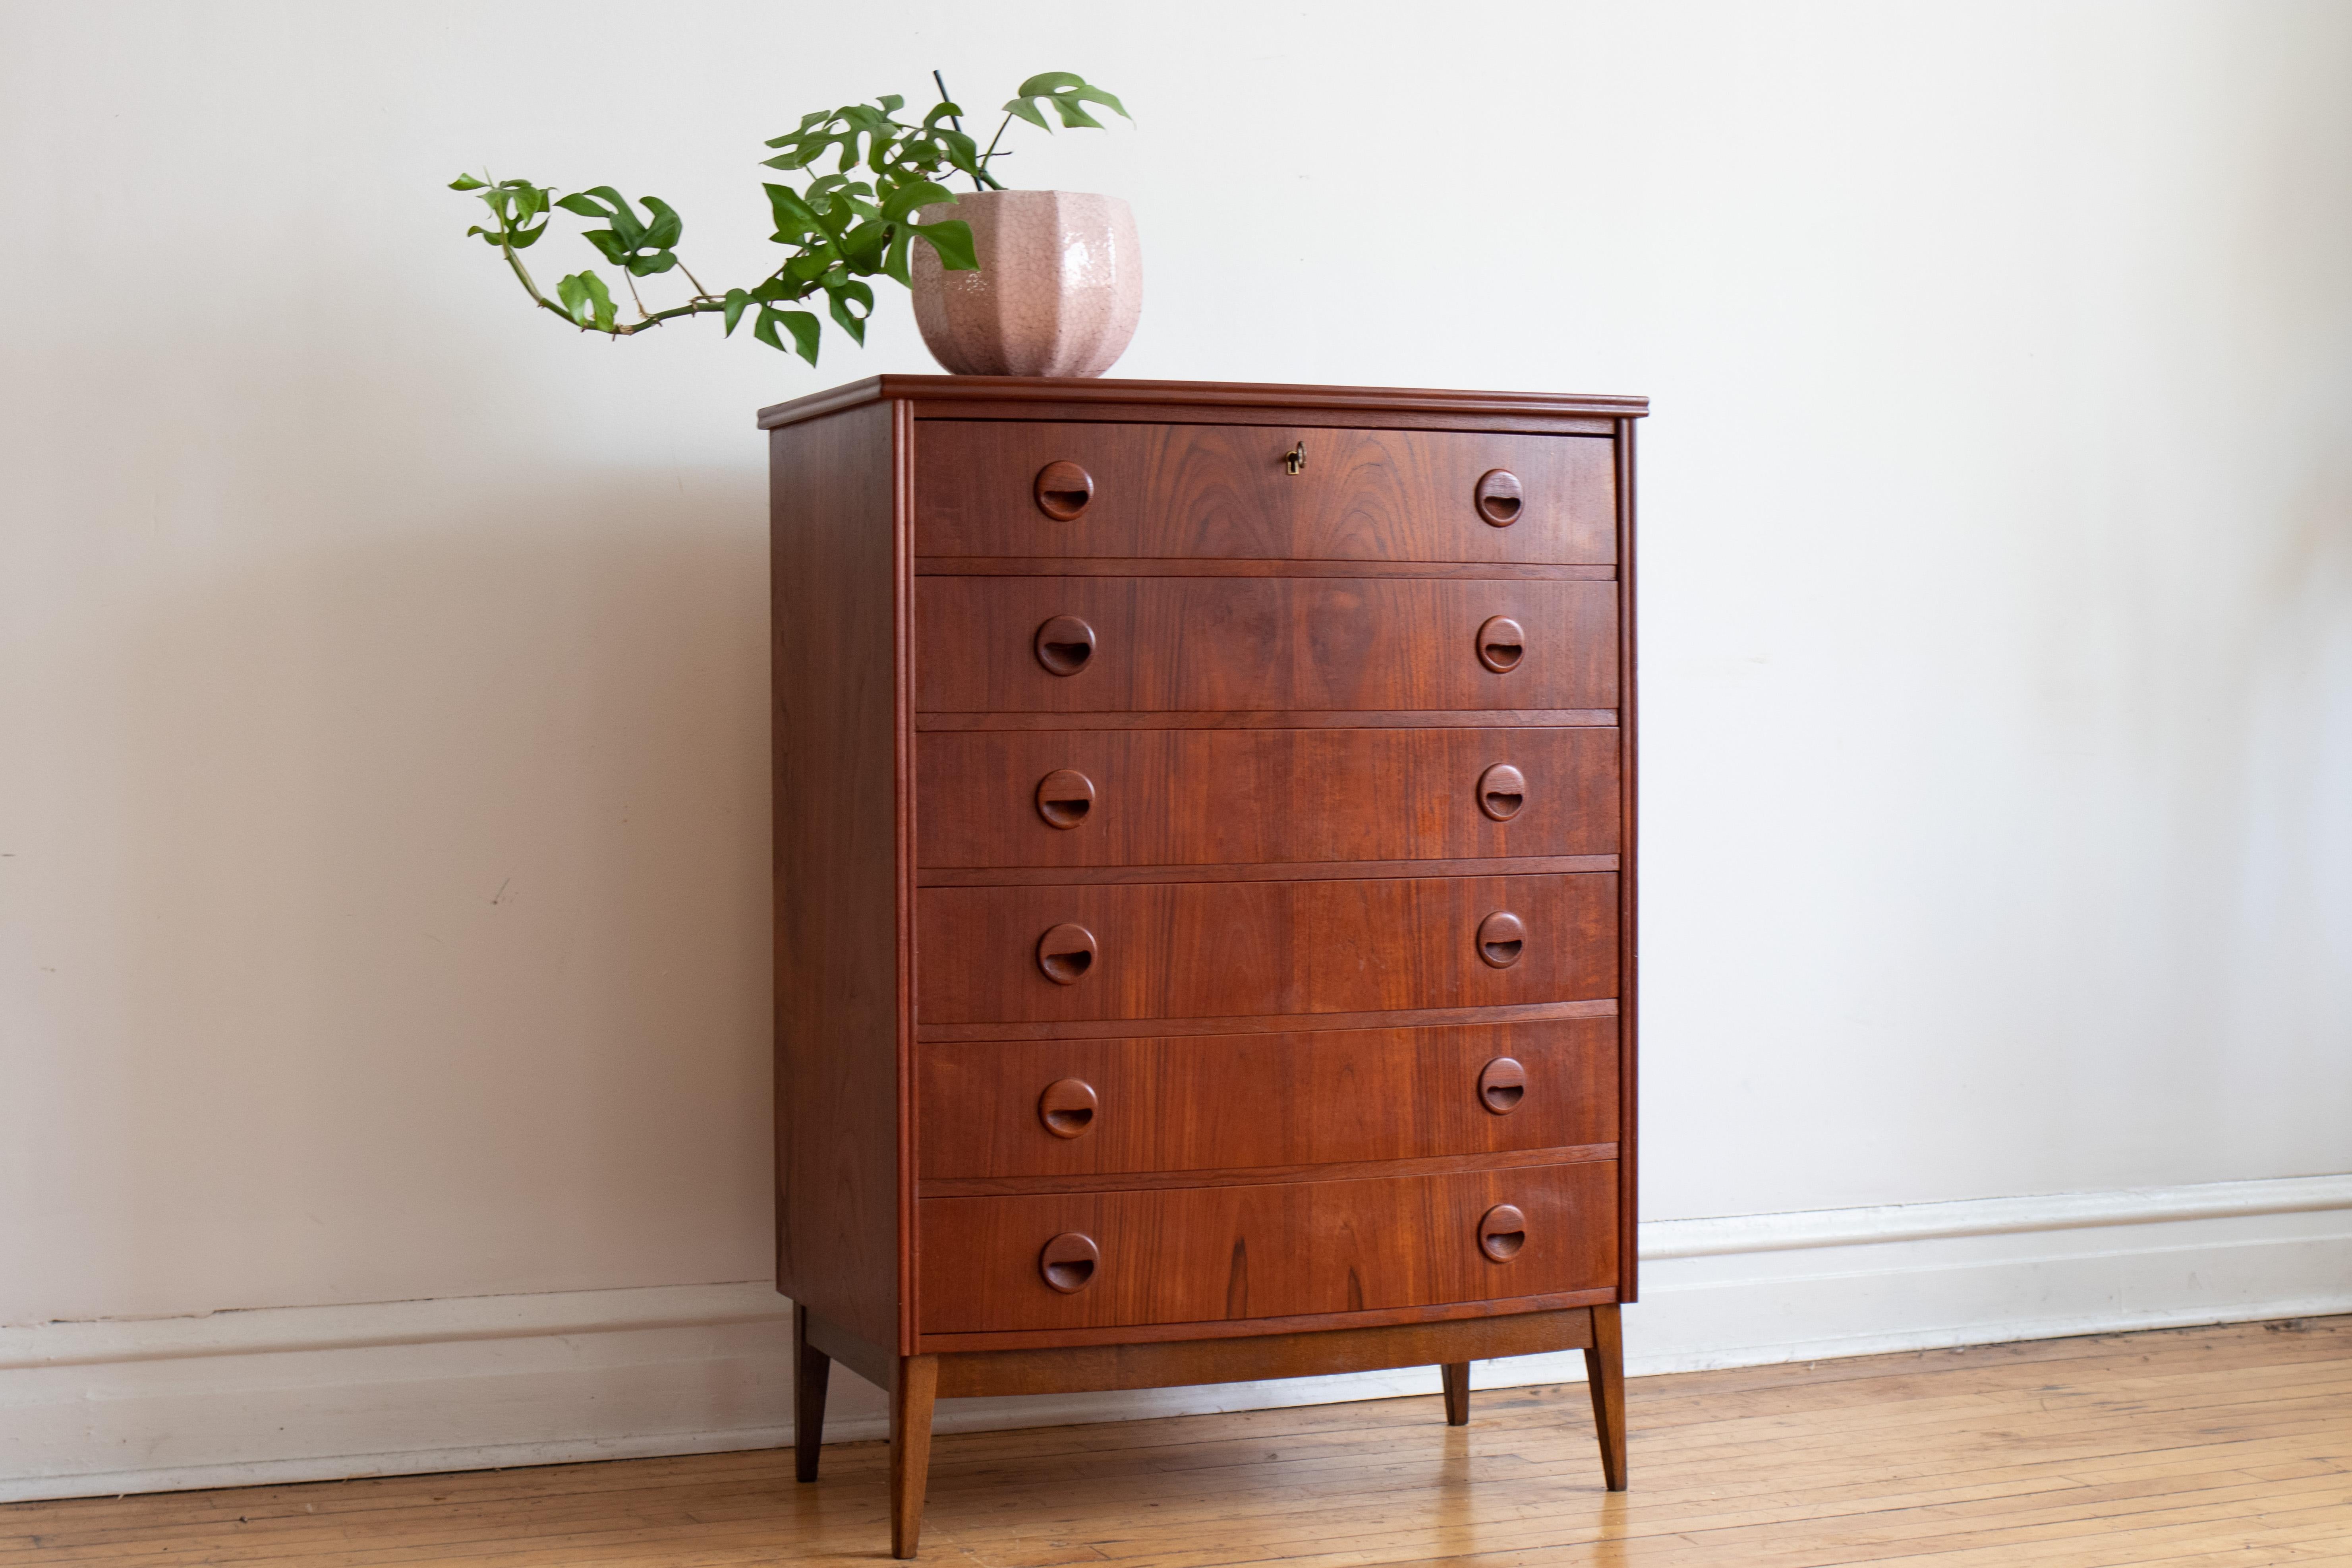 Mid-Century Modern Scandinavian teak bow front chest of drawers.
Just imported from Copenhagen.
Six dovetailed drawers.
Locking top drawer; includes vintage key.
Slightly splayed legs.
Excellent vintage condition.

Measures: 30 3/4” wide x